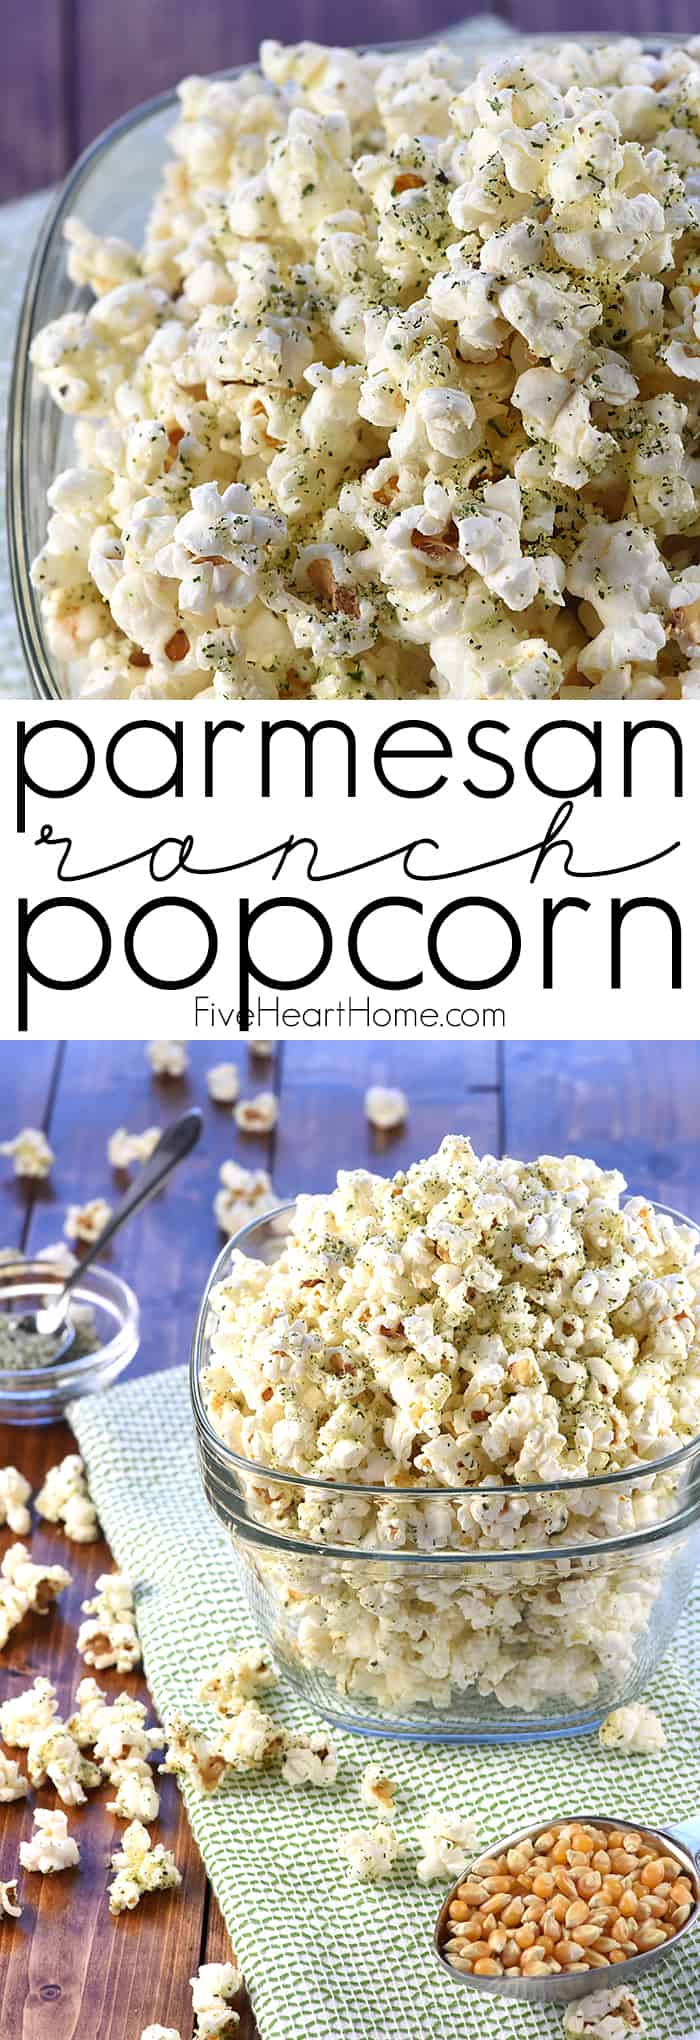 Parmesan Ranch Popcorn, two-photo collage with text.